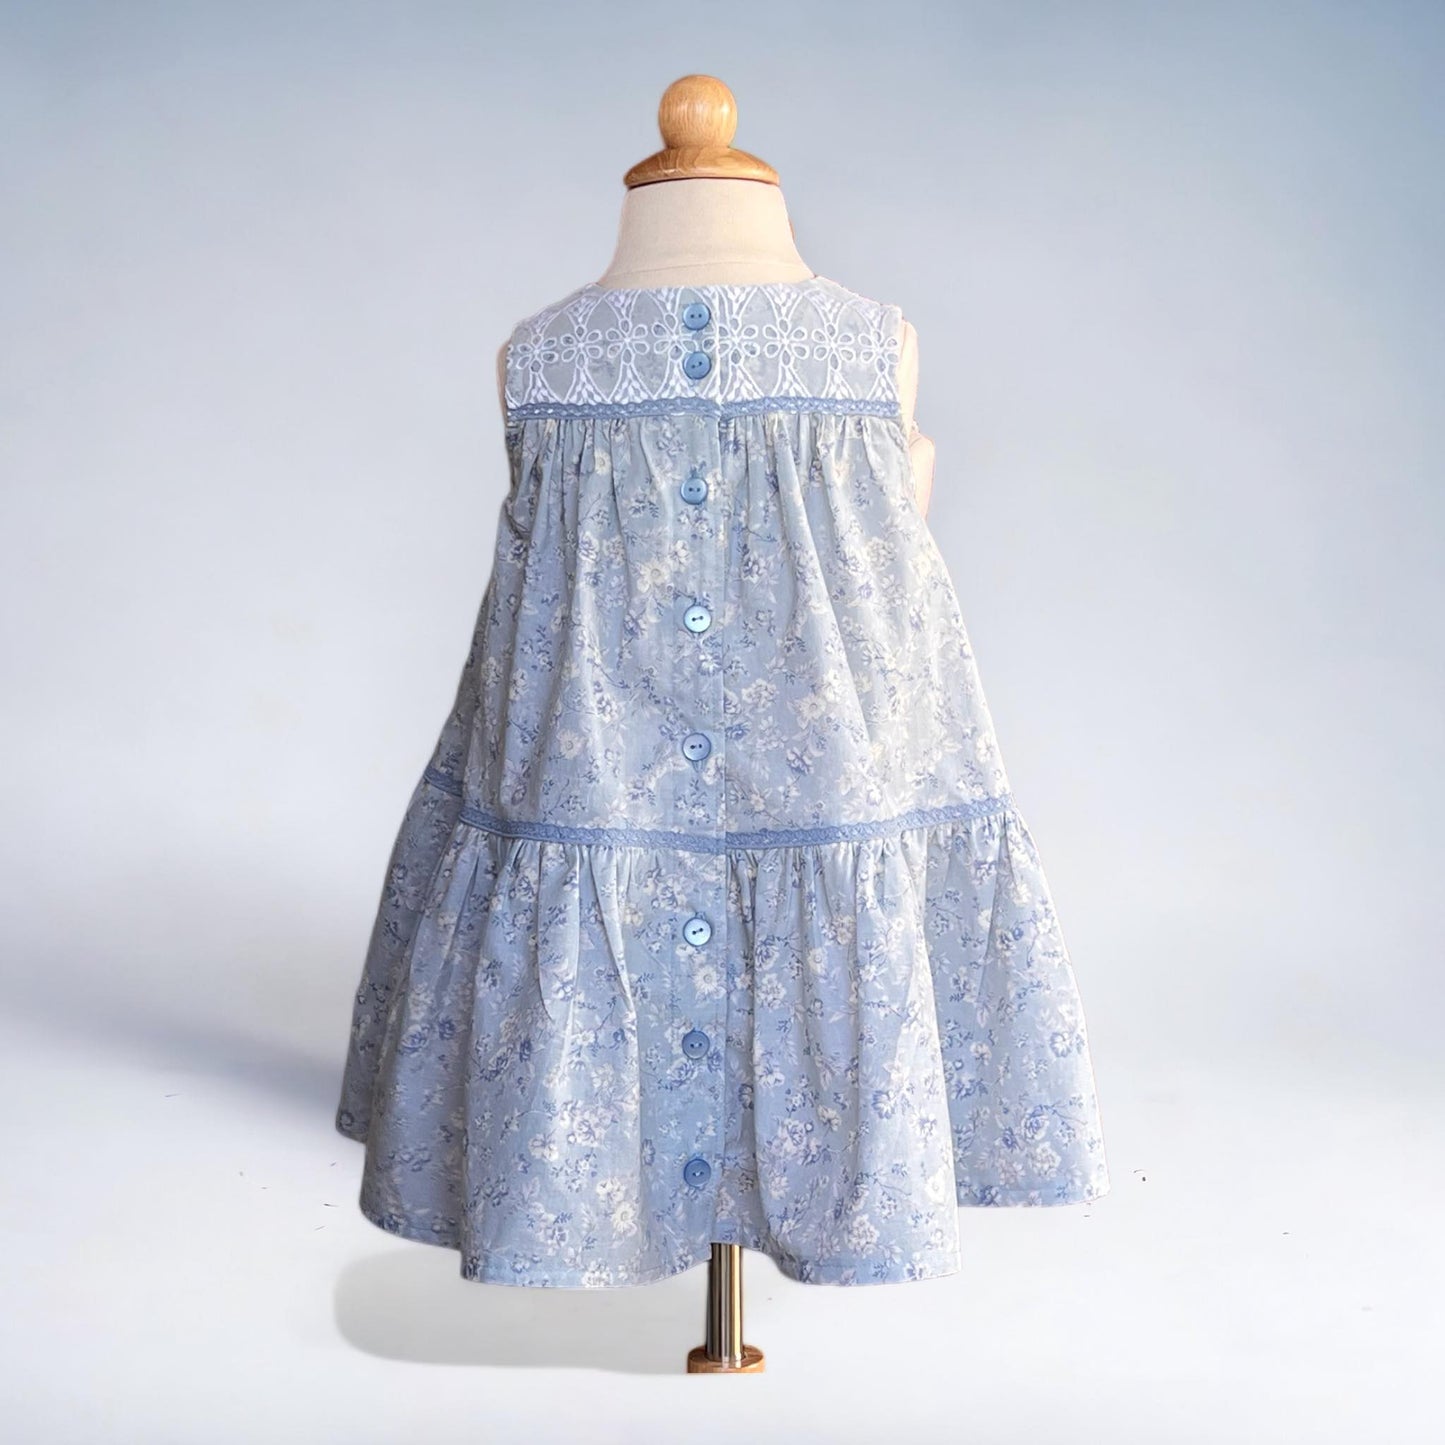 A delightful size 4T dress perfect for twirling. A lovely blue floral pattern and featuring a charming button-down back. Free Shipping.